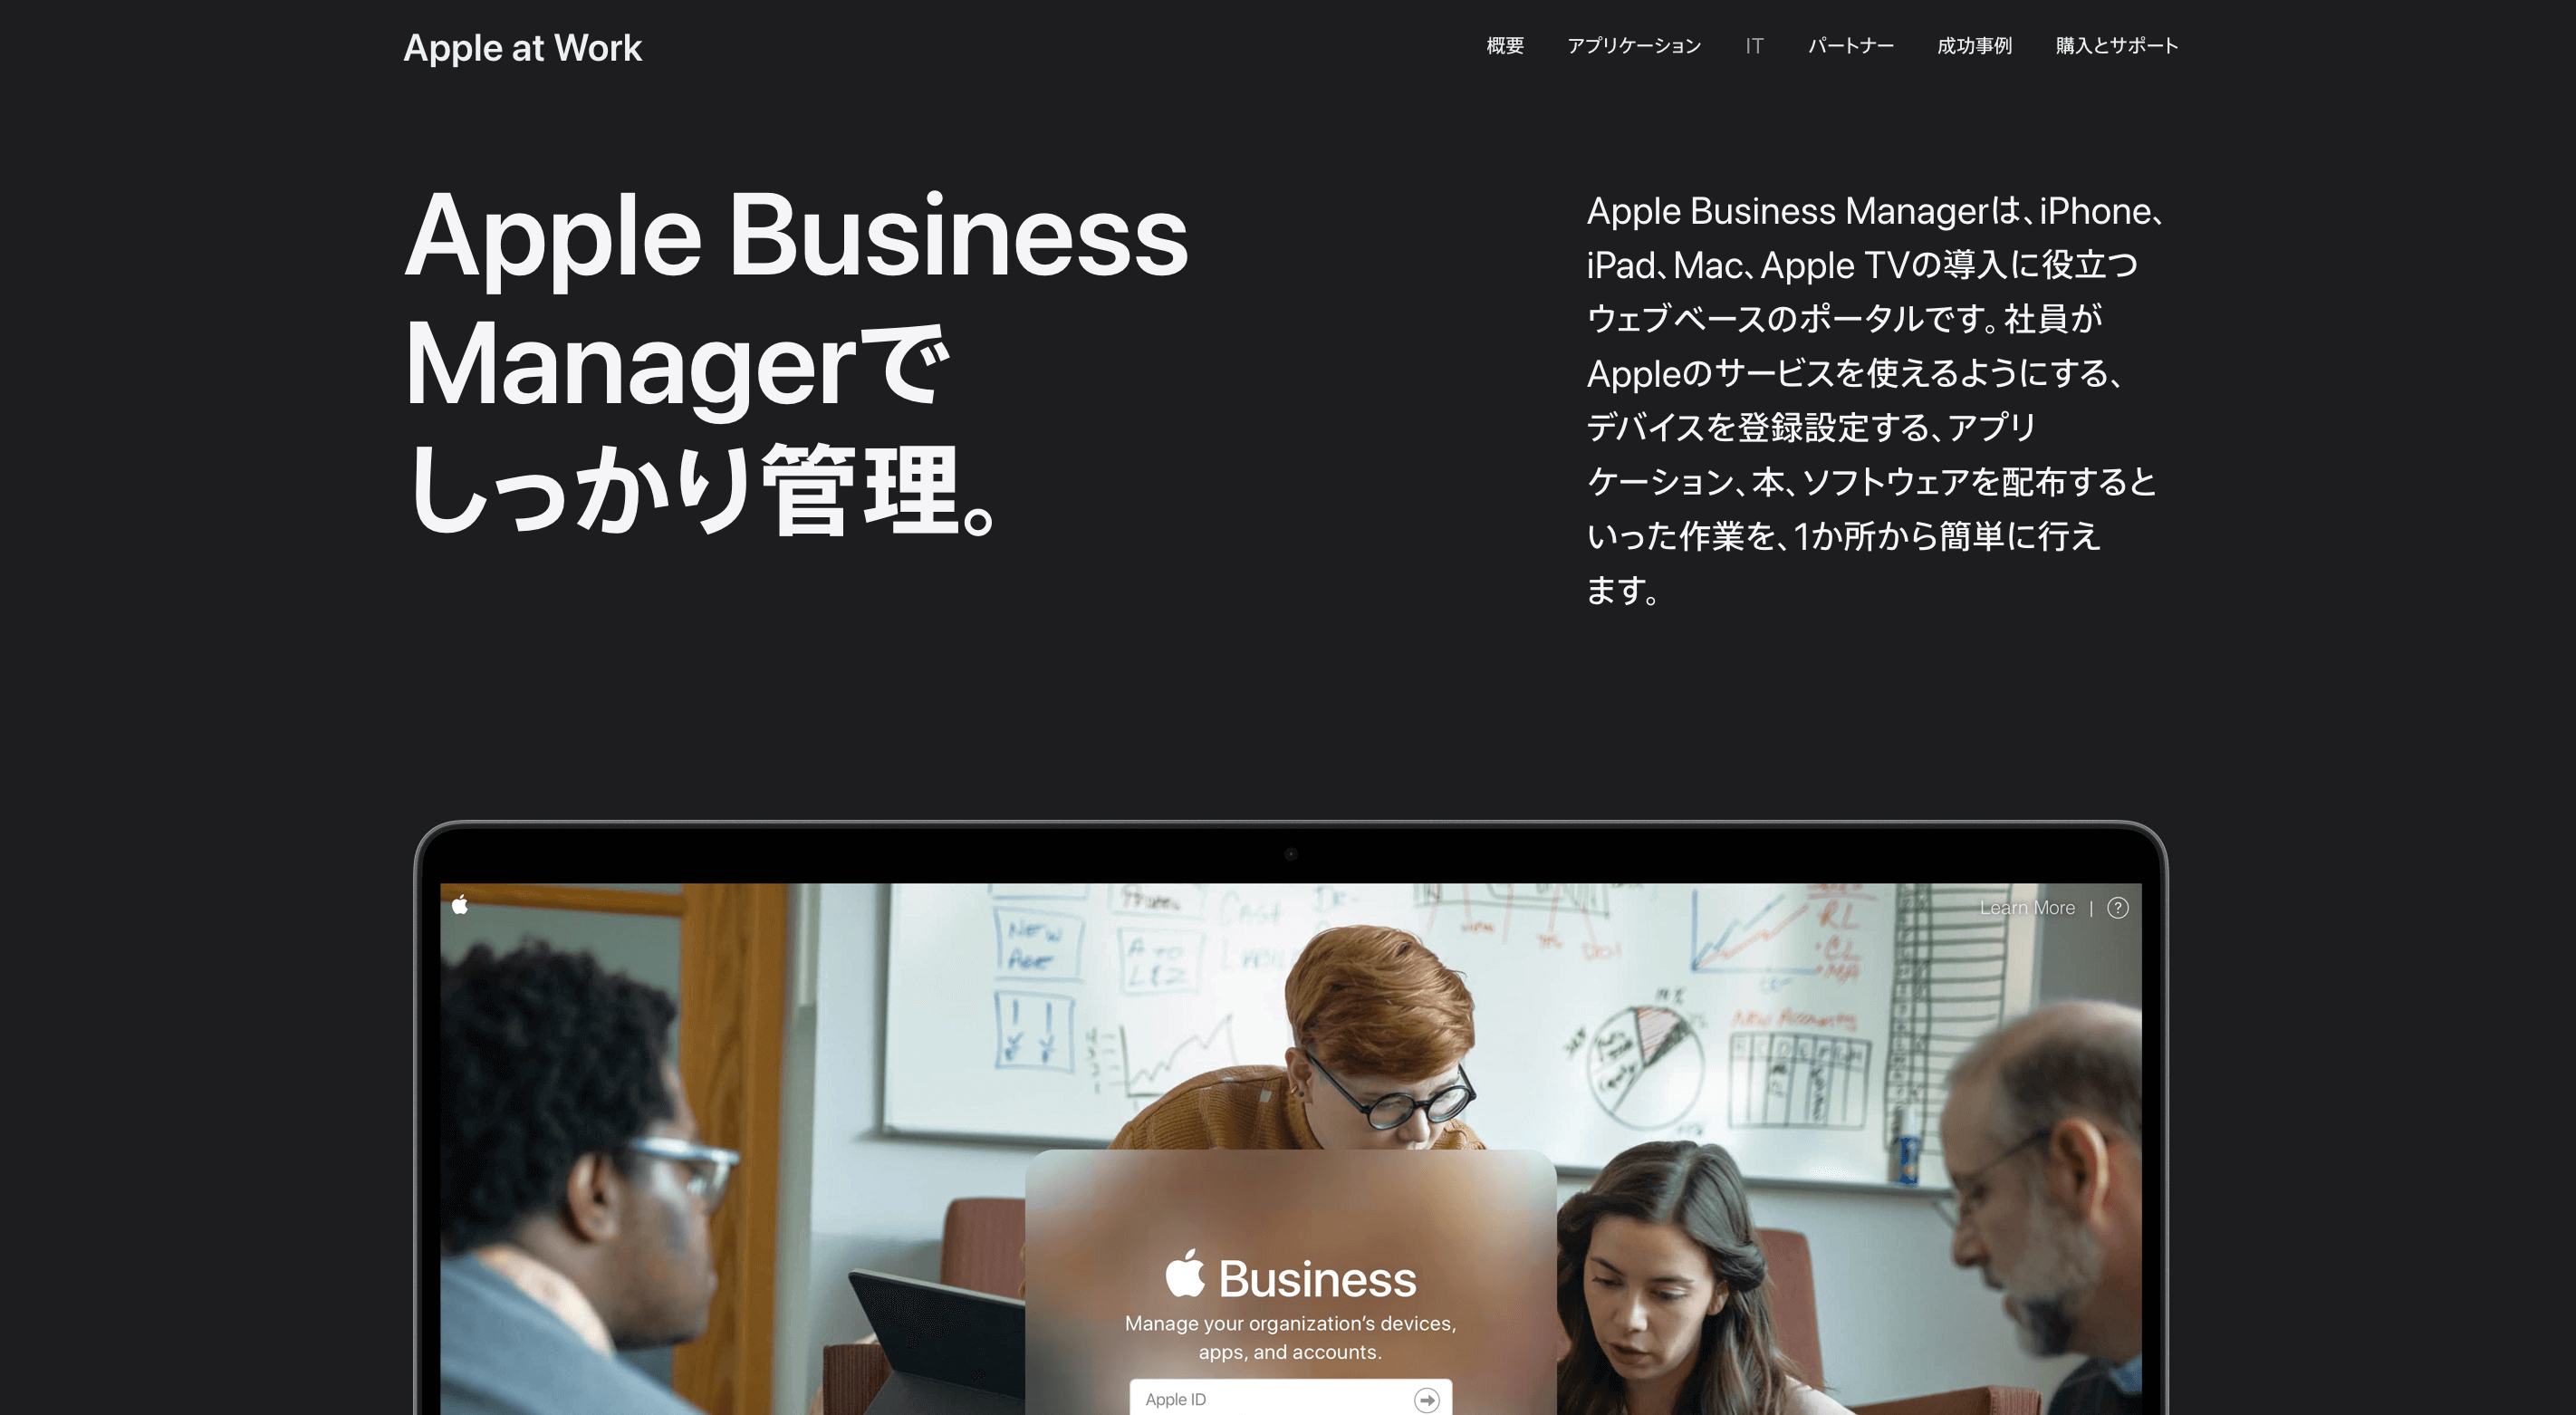 【Apple】Apple Business Manager(ABM)とは？利用登録方法と必要なもの